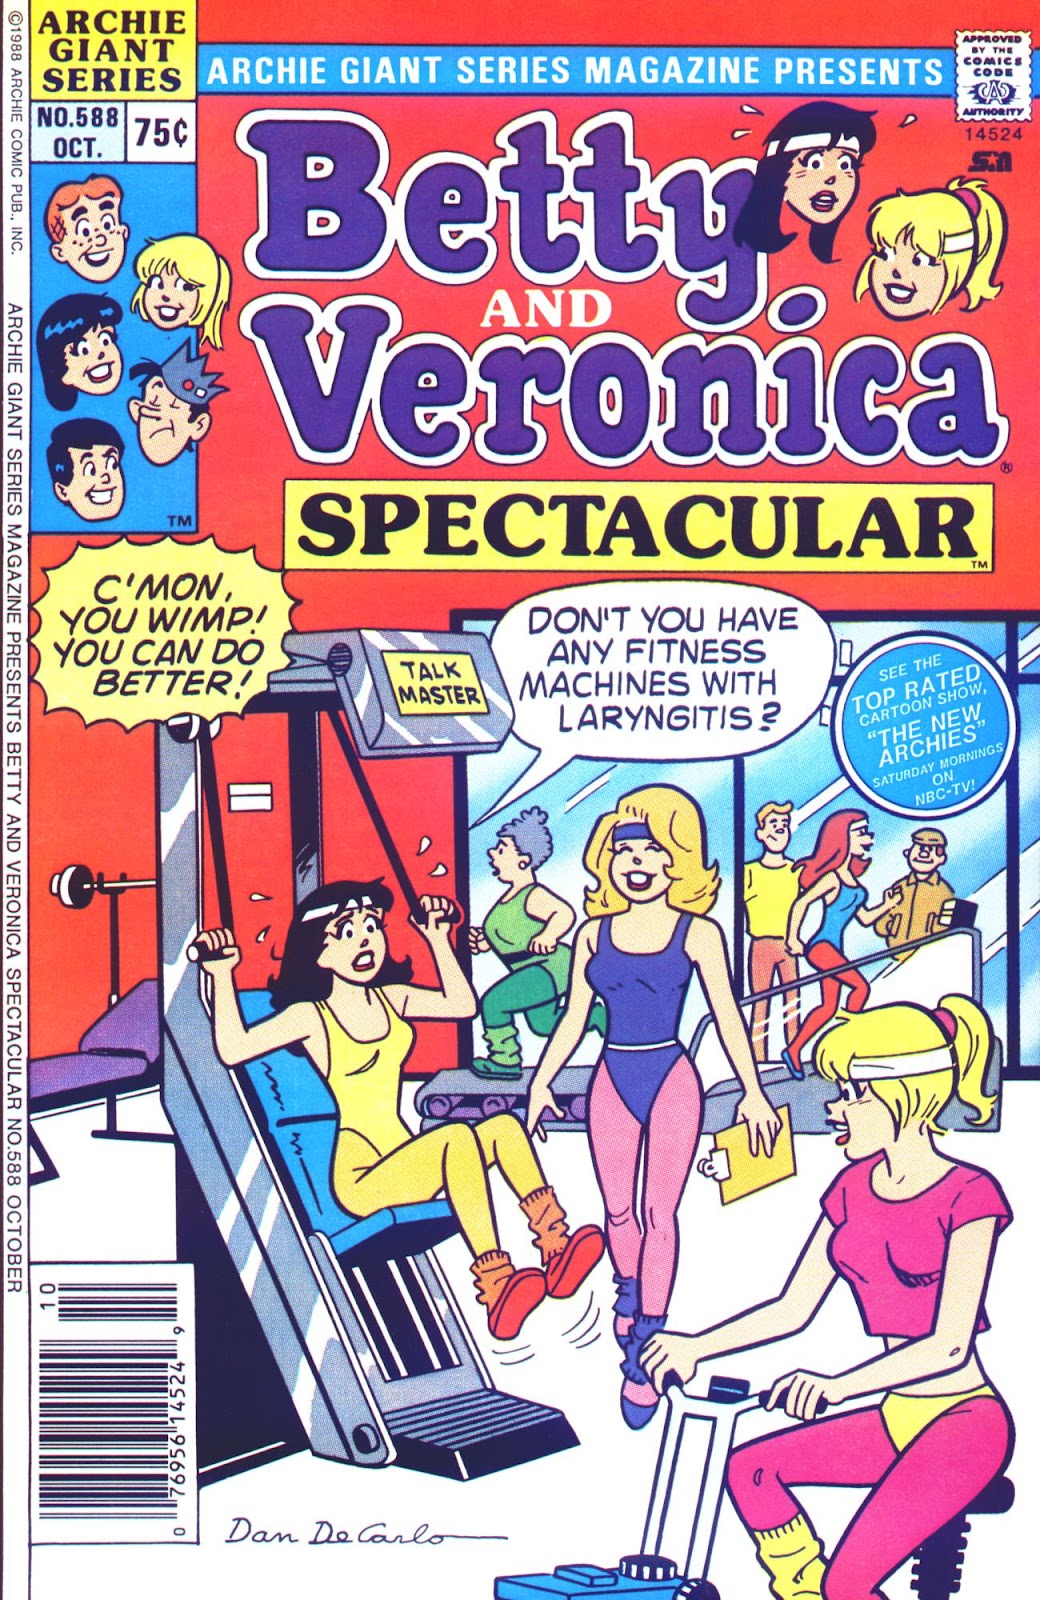 Archie Giant Series Magazine 588 Page 1